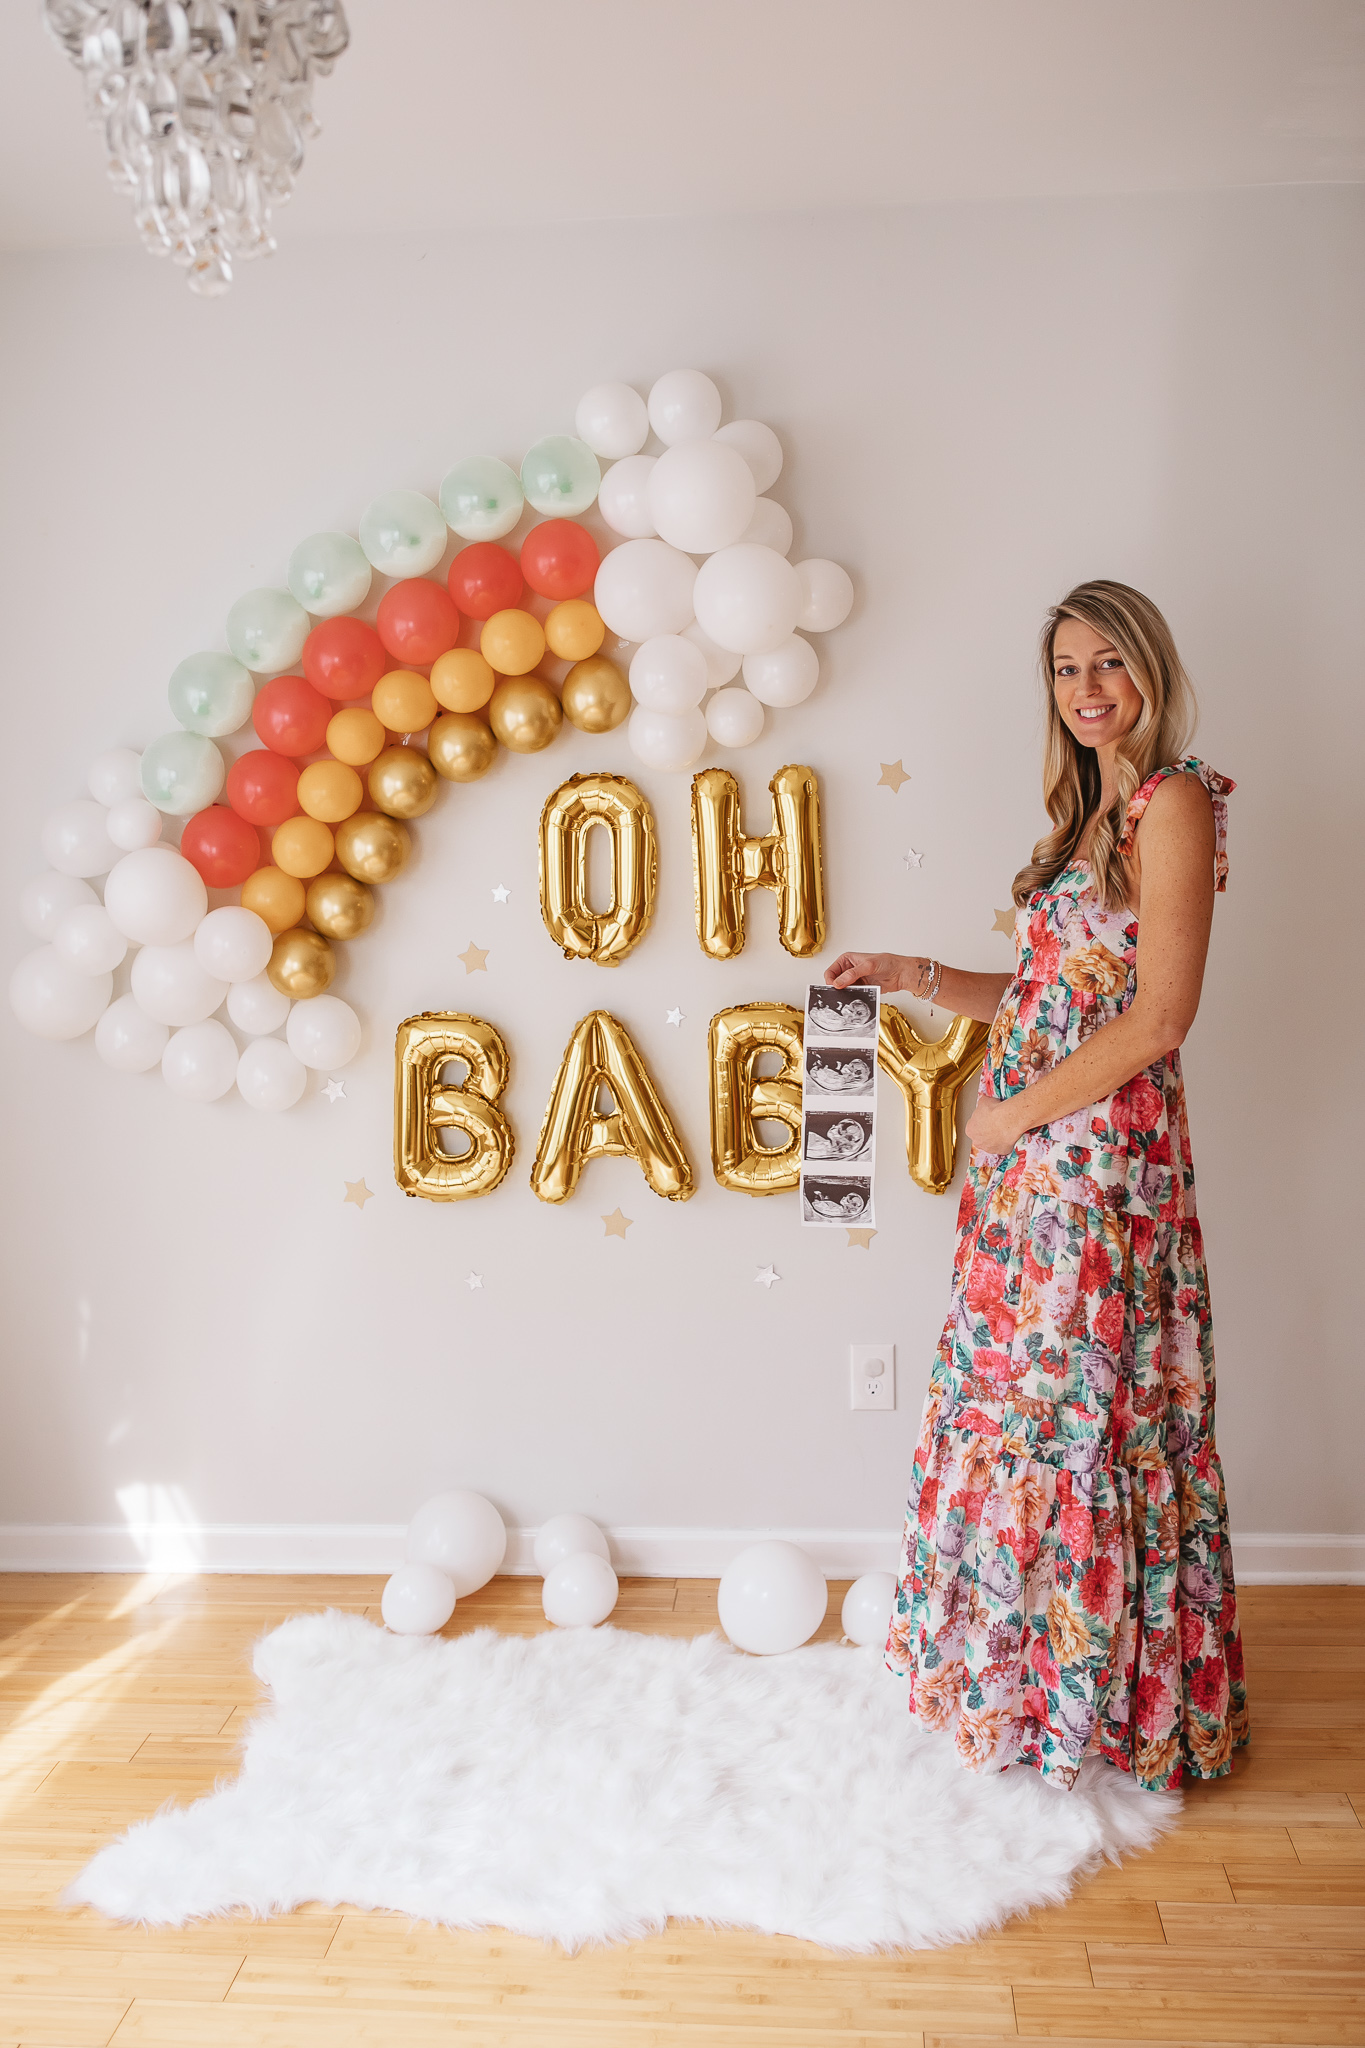 DIY Rainbow Baby Pregnancy Announcement. Mommy to be with the ultrasound. Rainbow baby balloon backdrop for photos.